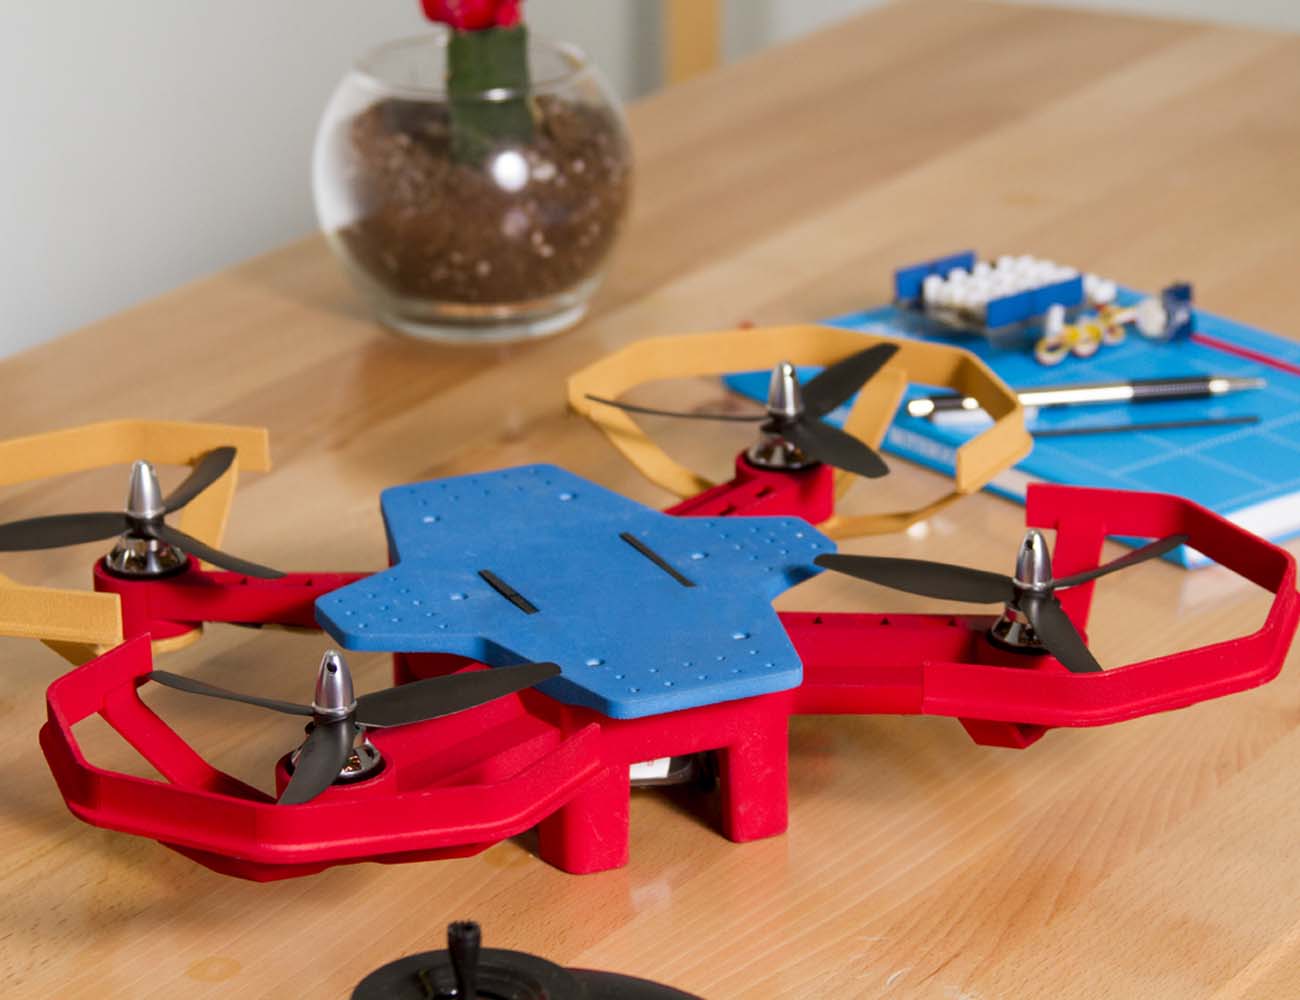 Eedu – An Easy Drone Kit That Teaches You Coding And Robotics